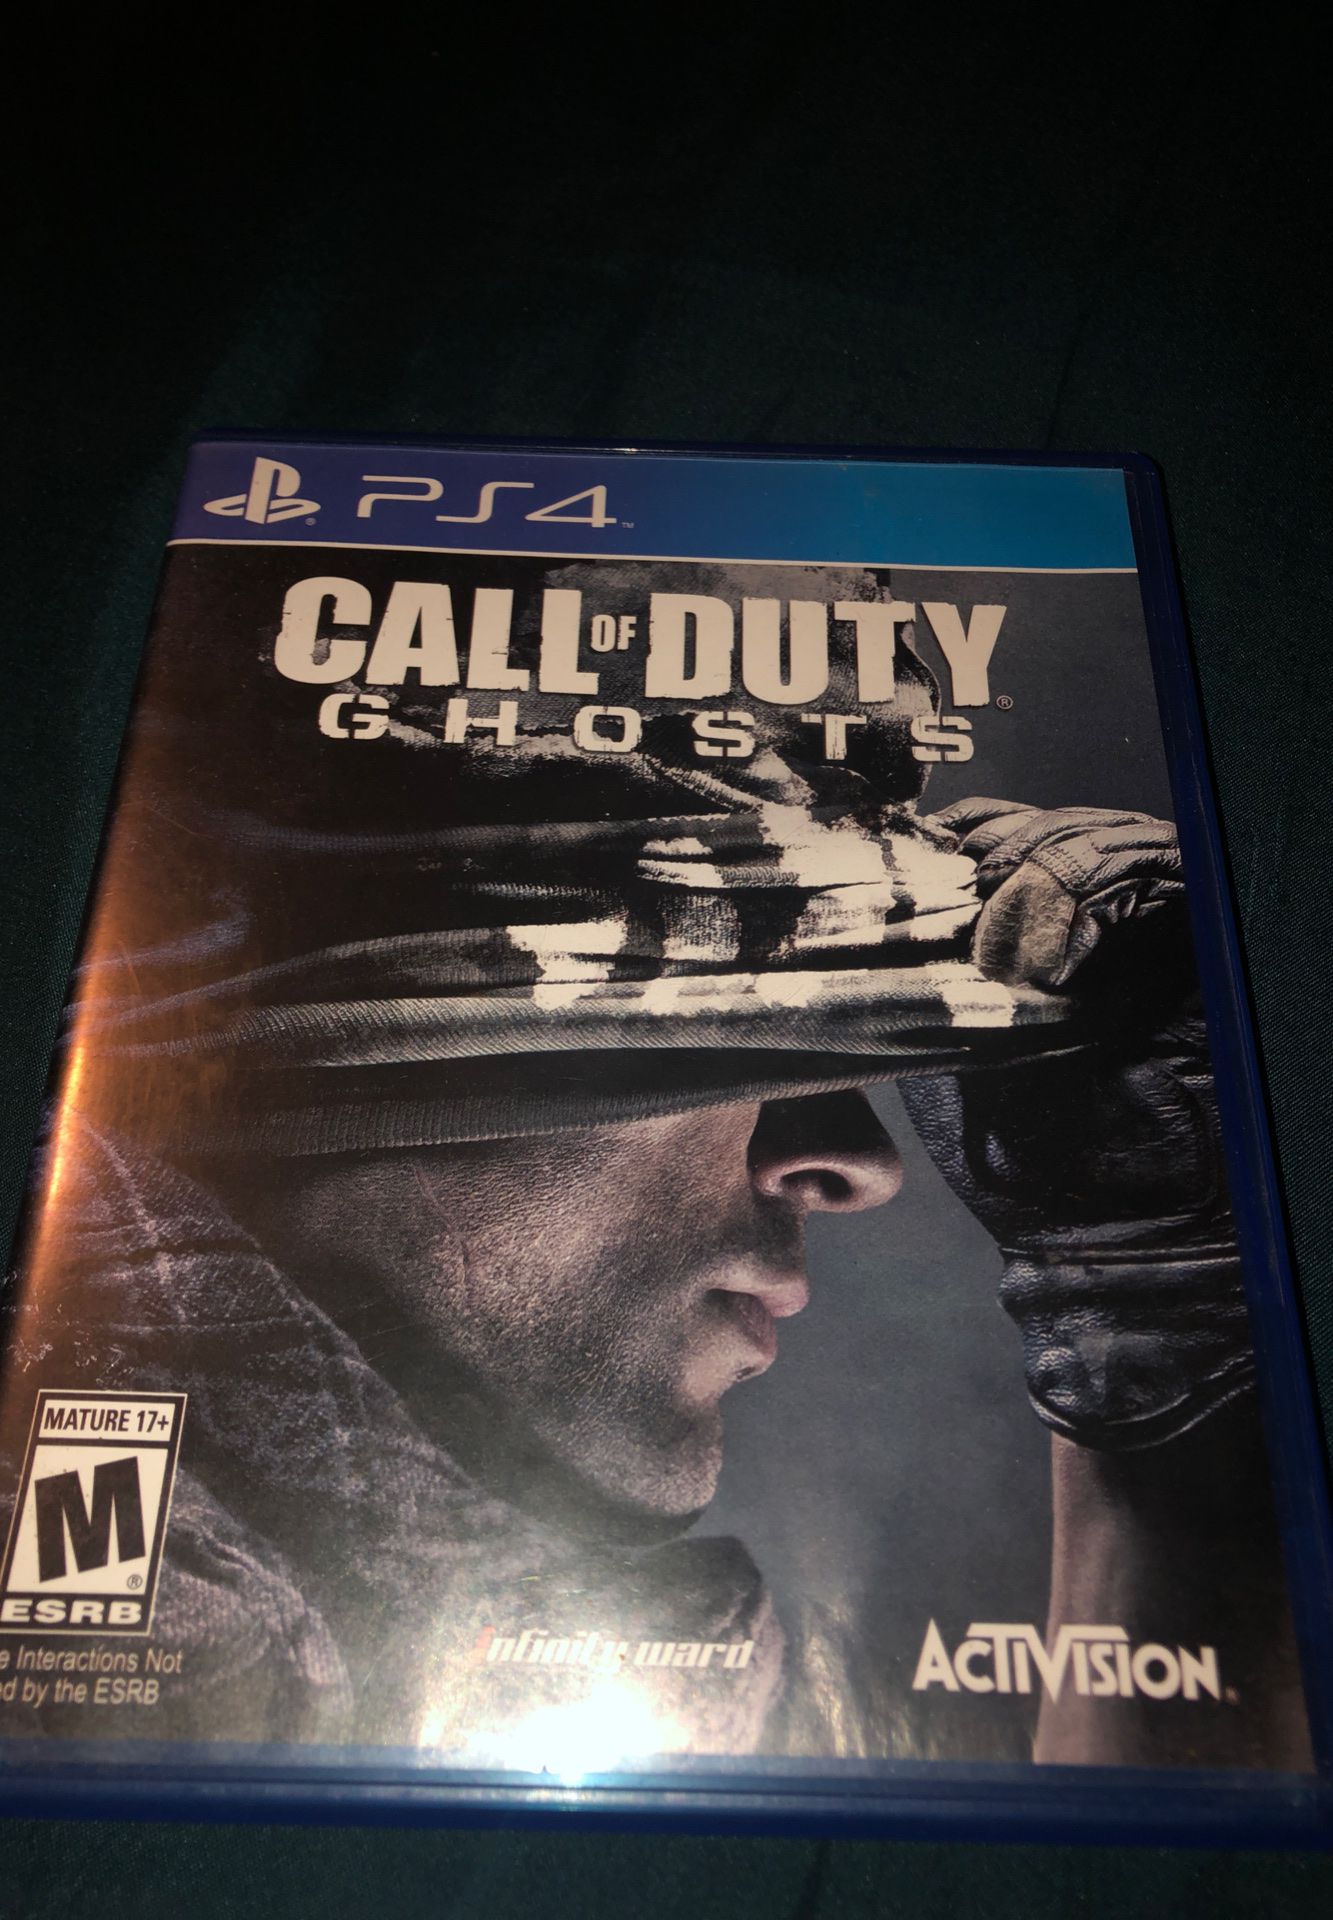 Call of duty ghost, ps4 video game